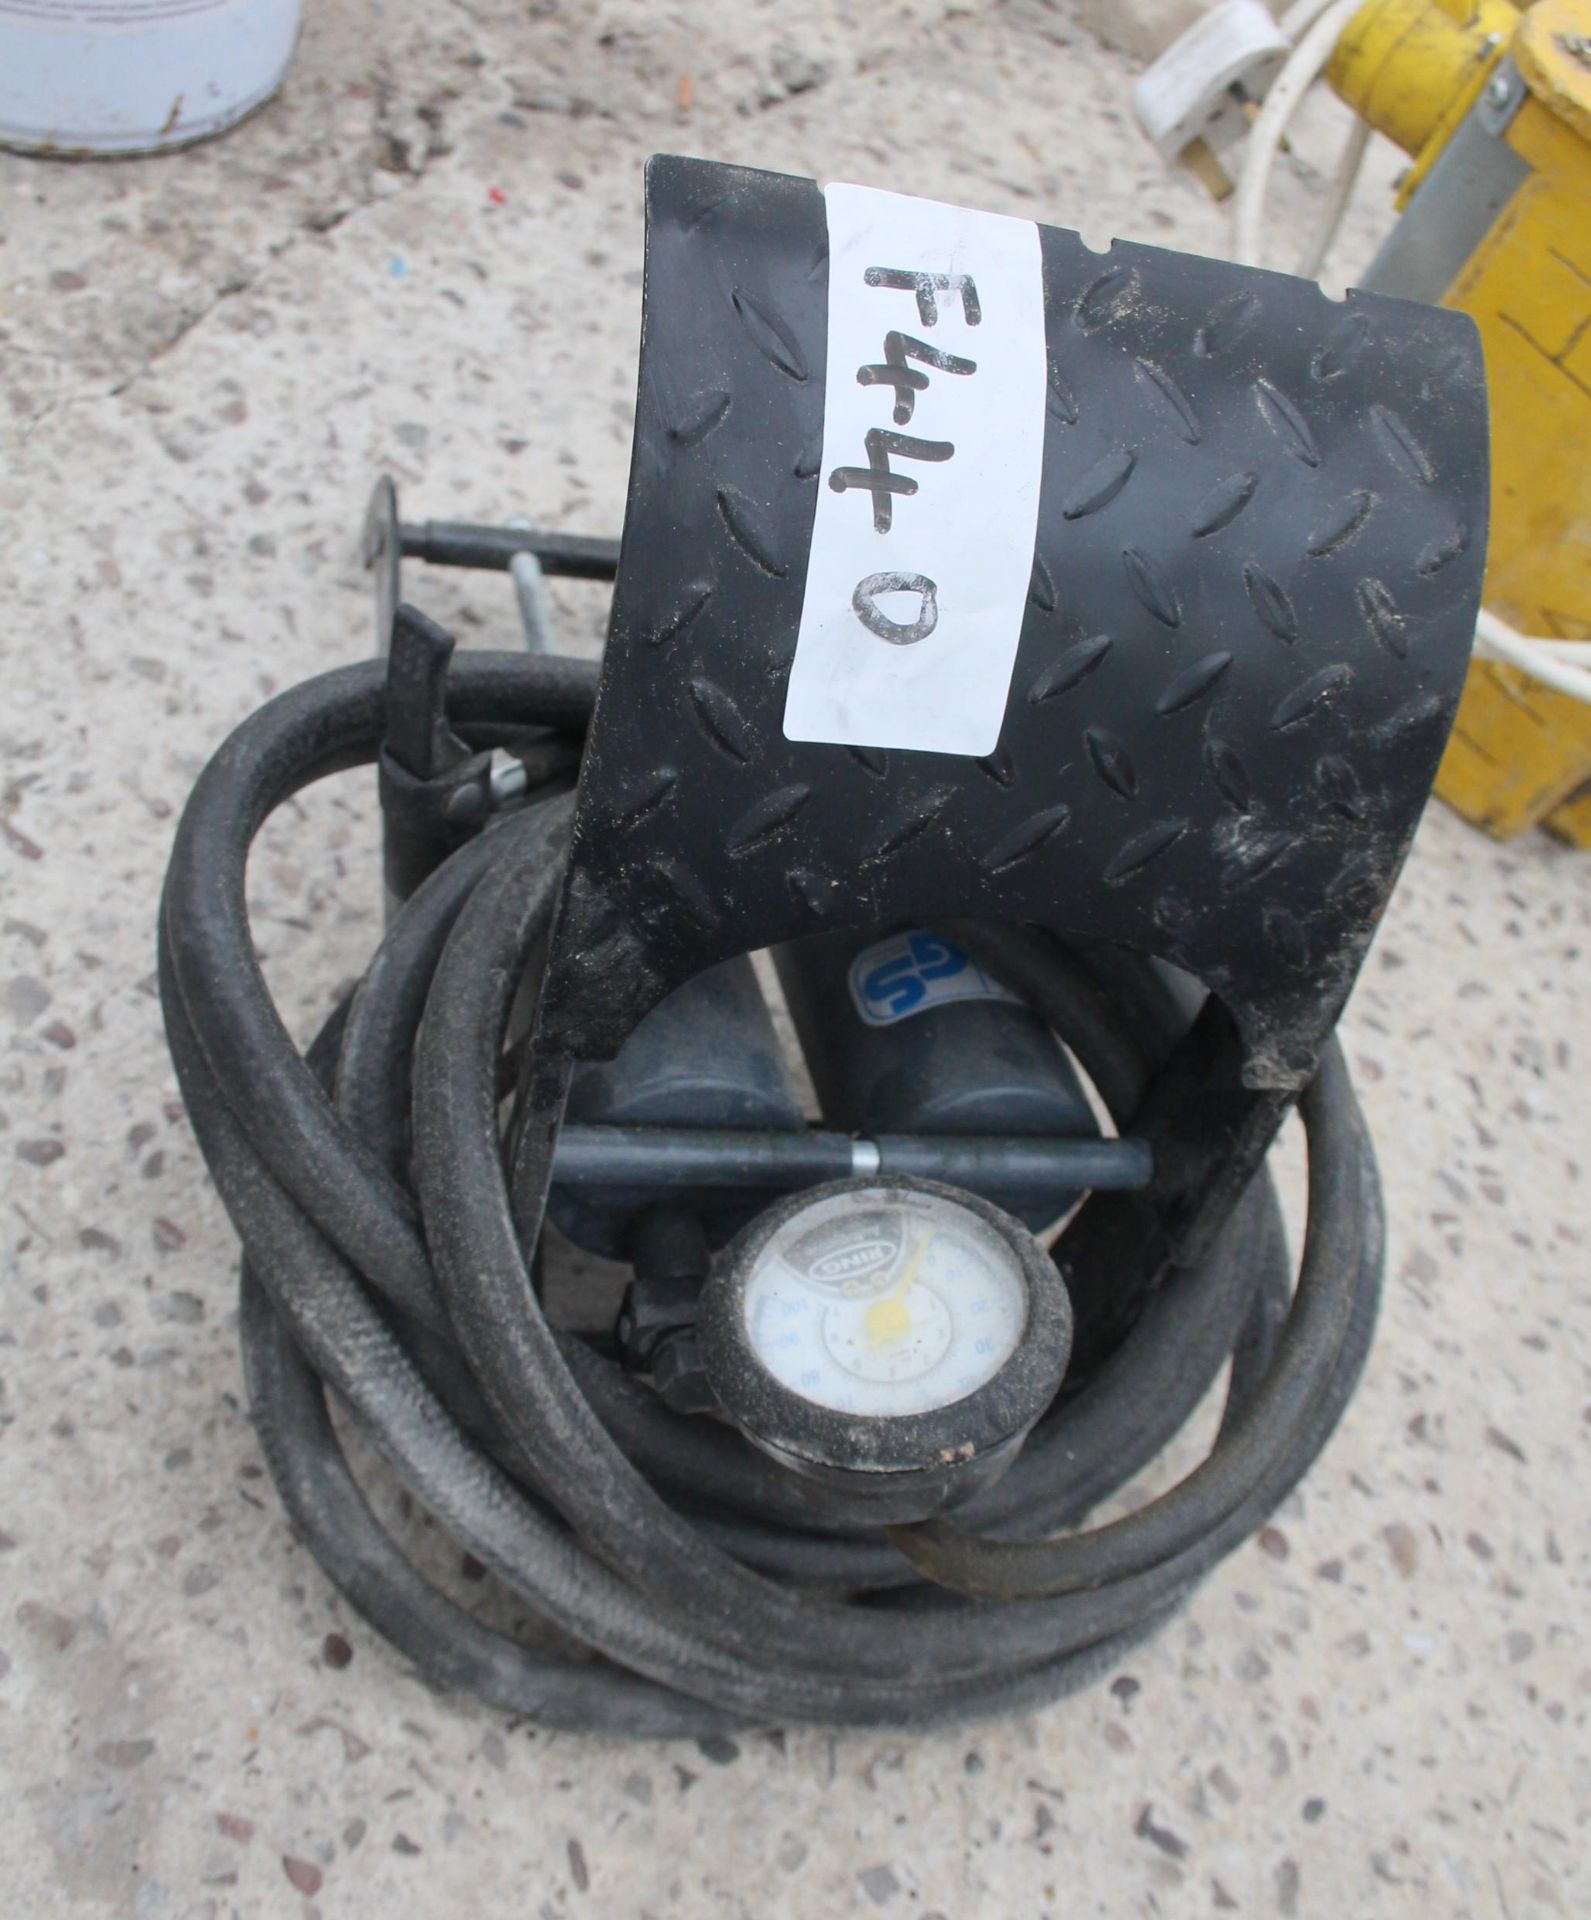 ONE YELLOW 110V TRANSFORMER AND FOOT PUMP - NO VAT - Image 3 of 3